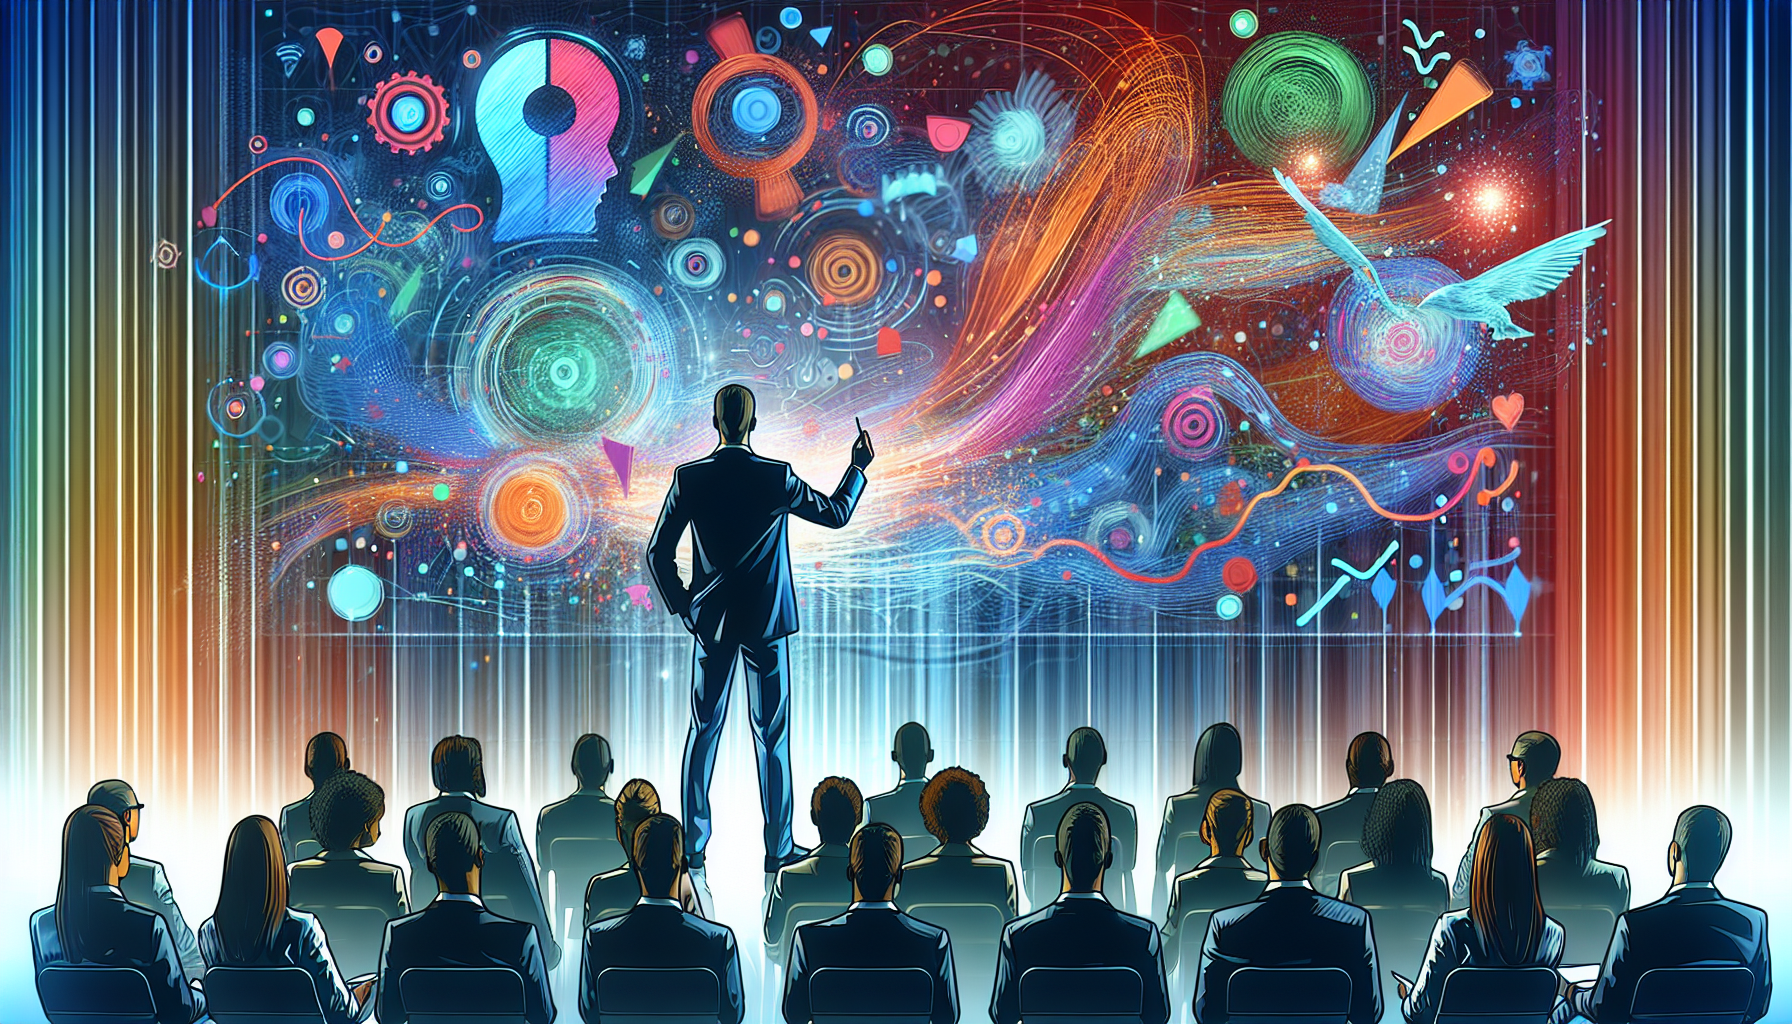 Creative illustration of a business pitch presentation